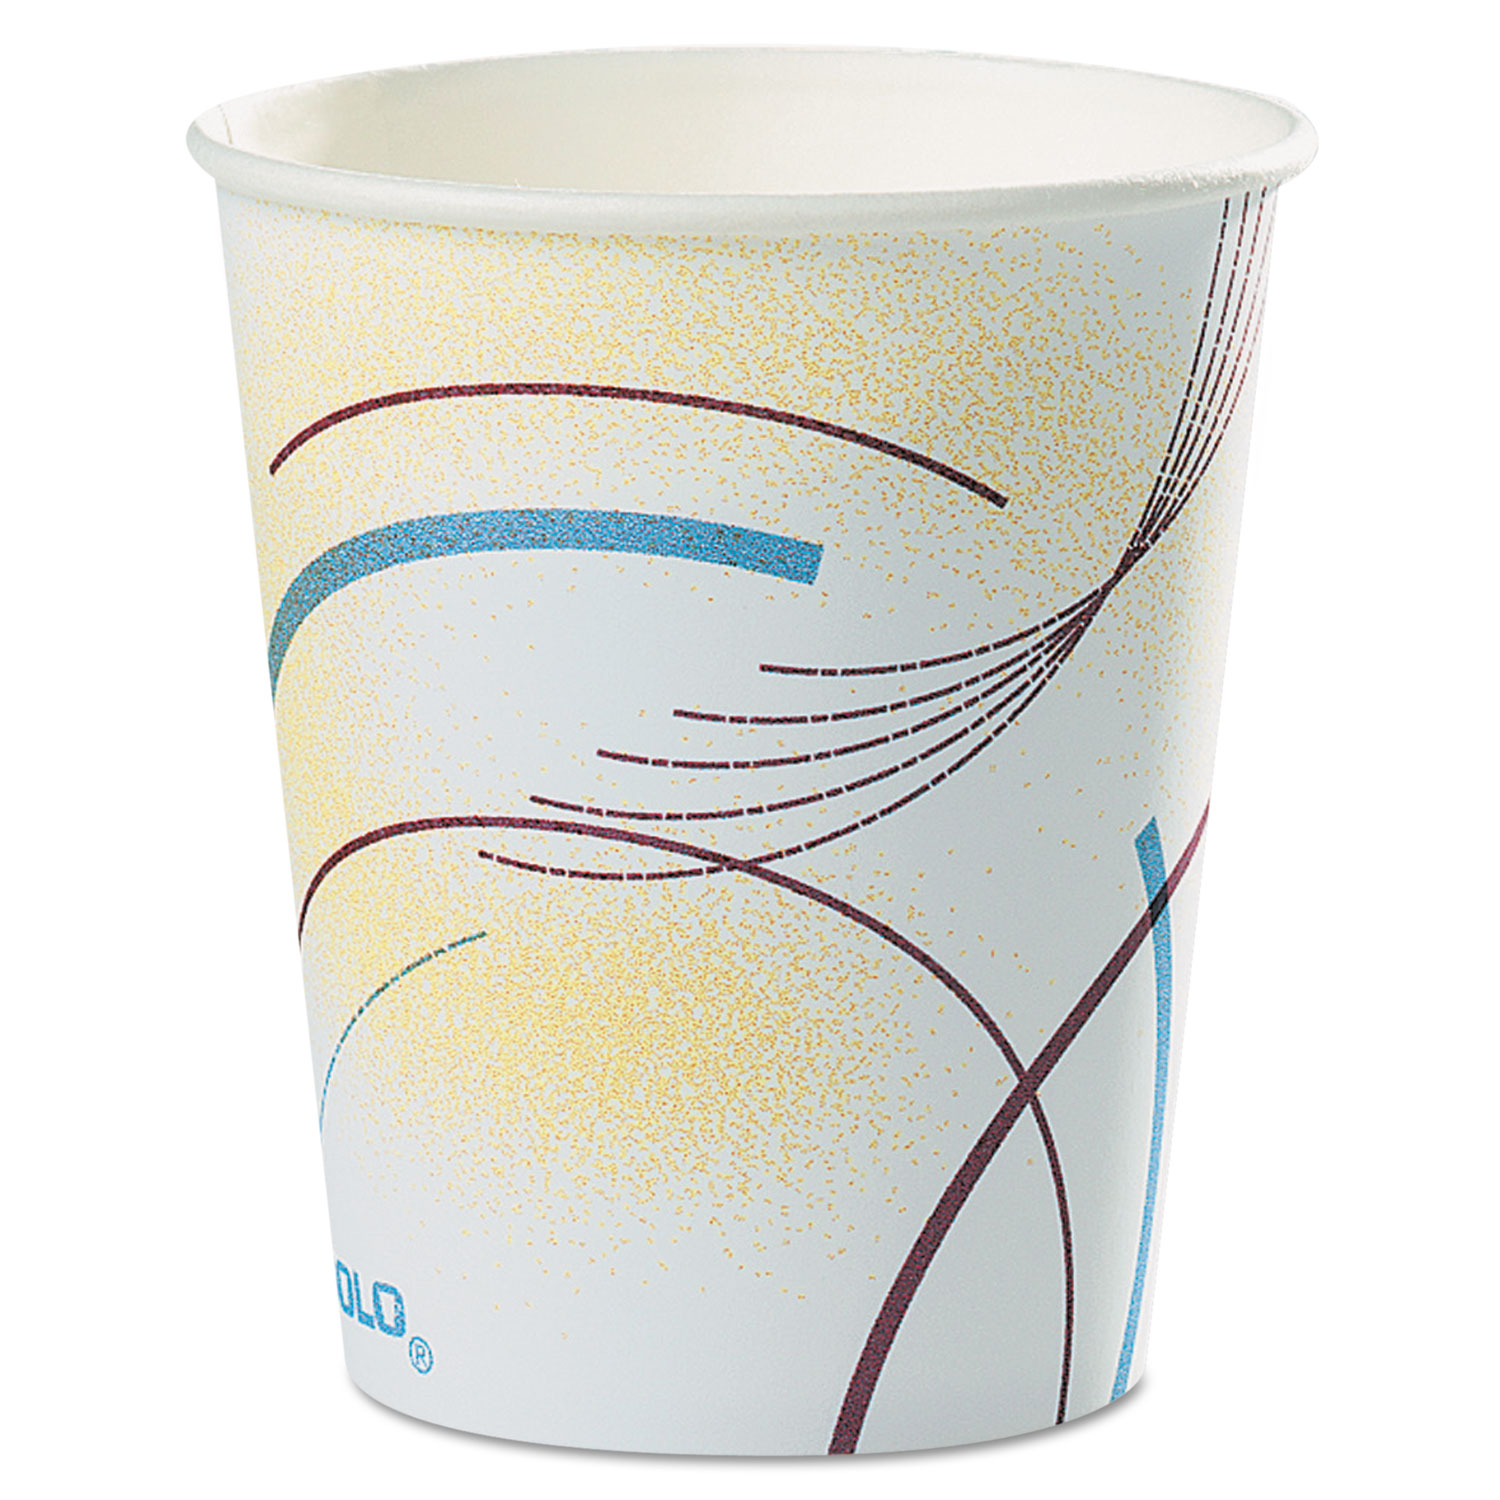  Dart 52MD-0062 Paper Water Cups, 5 oz., Cold, Meridian Design, Multicolored, 100/Sleeve, 25 Sleeves/Carton (SCC52MD) 